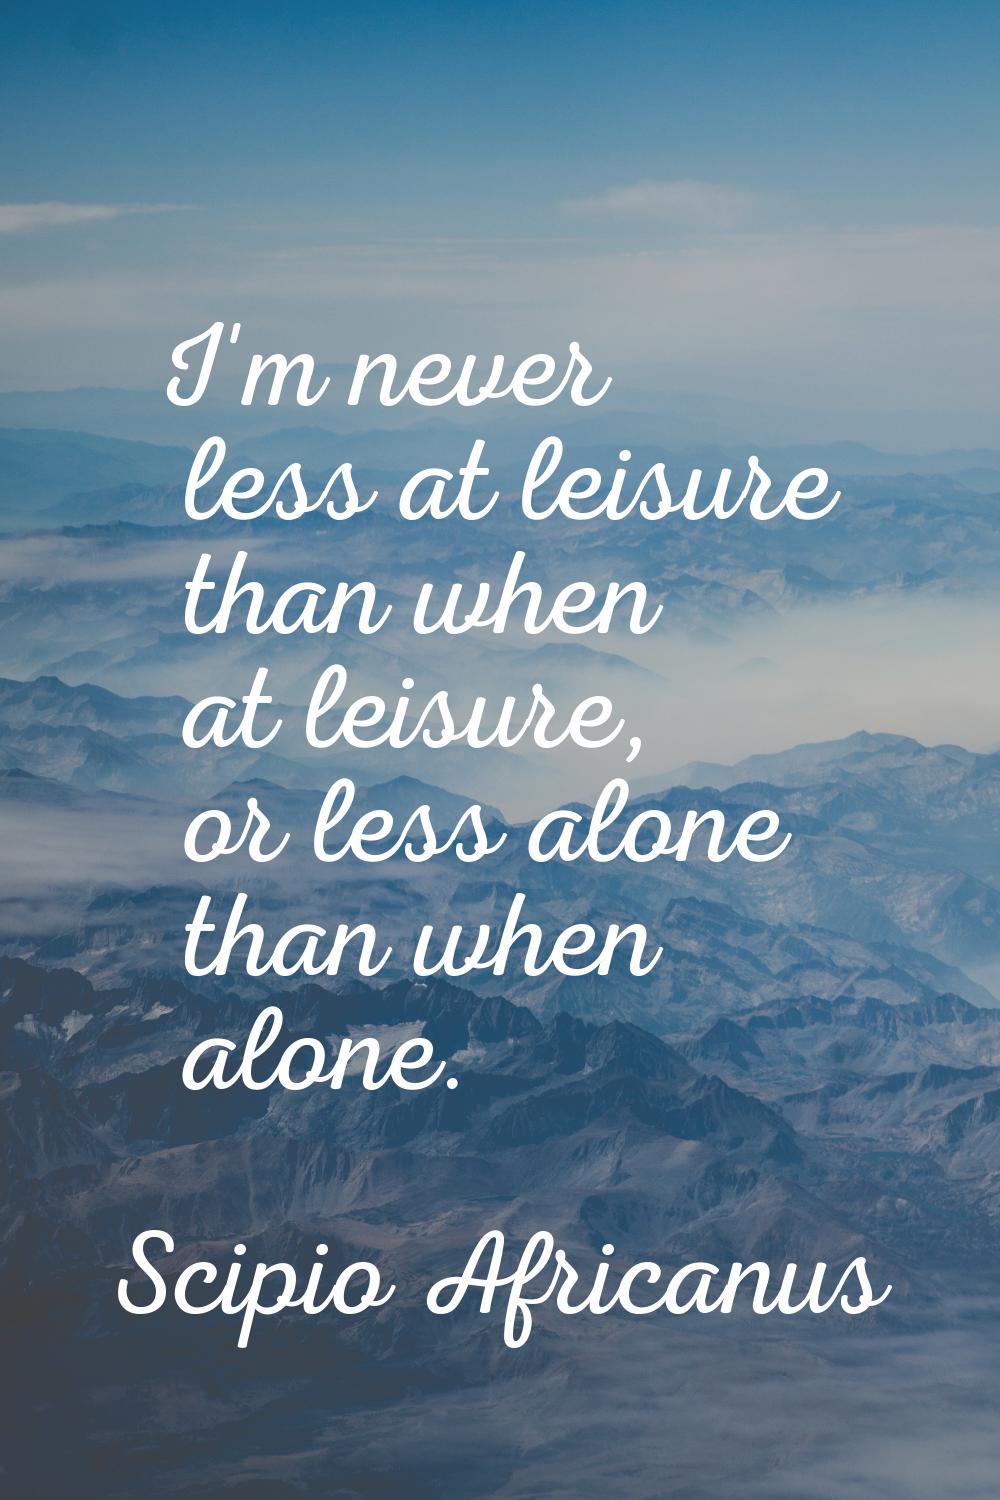 I'm never less at leisure than when at leisure, or less alone than when alone.